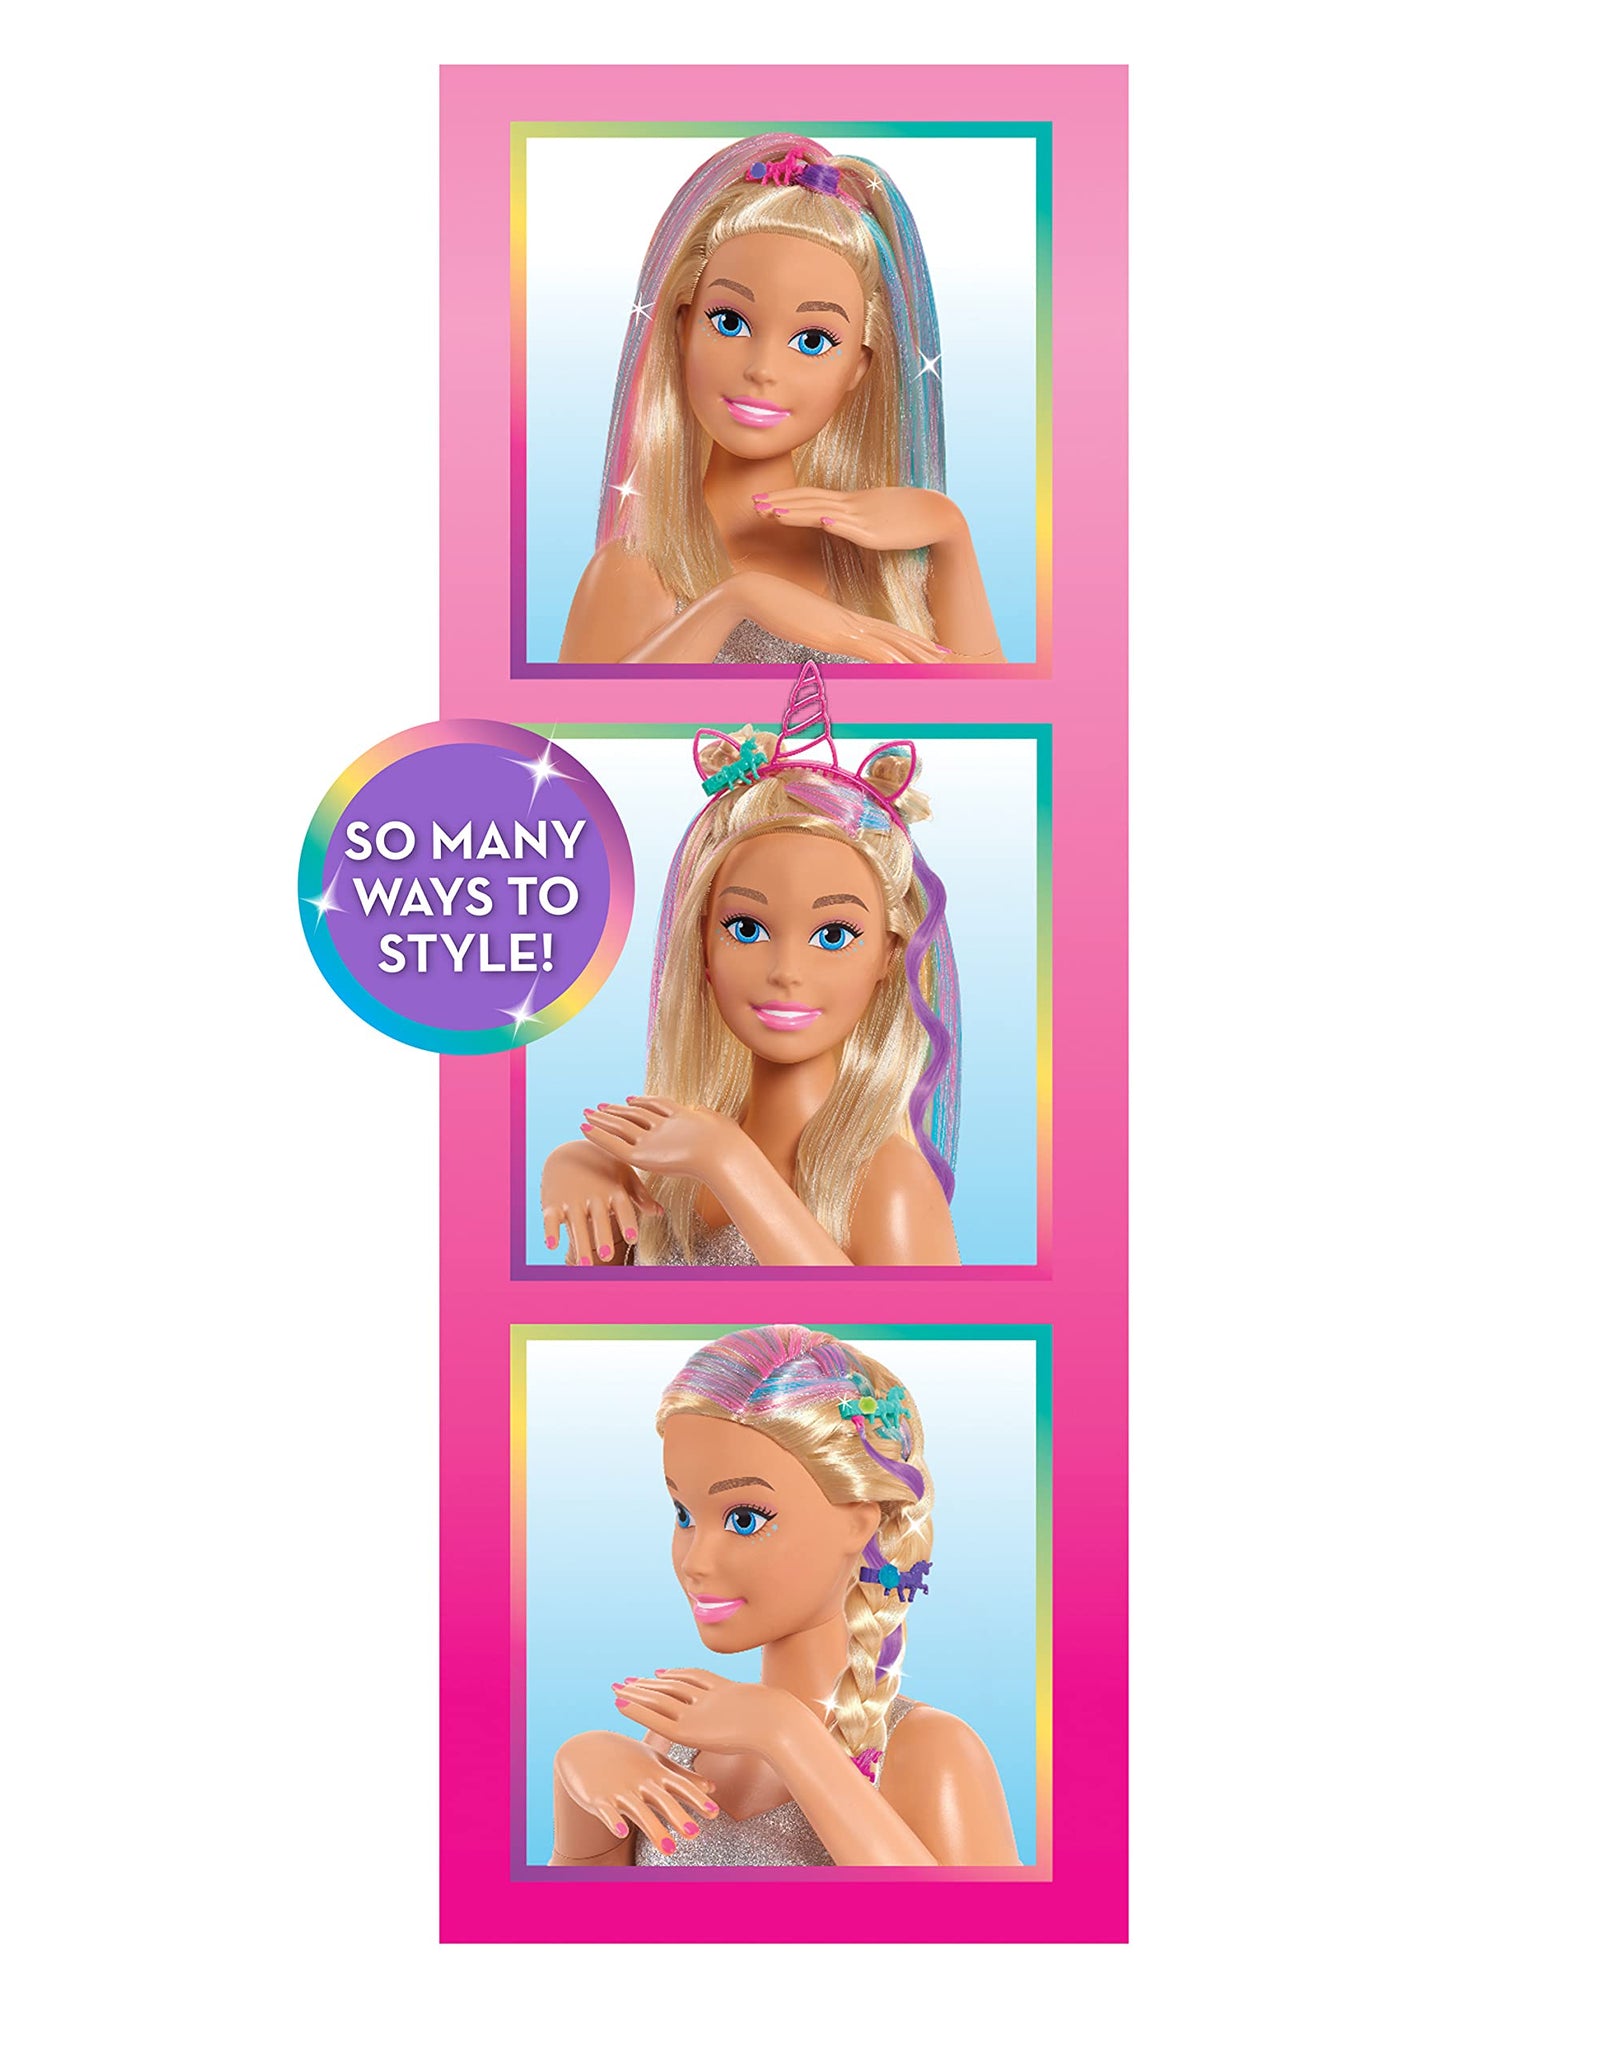 Barbie Deluxe 20-Piece Glitter and Go Styling Head, Blonde Hair and Unicorn Headband, by Just Play